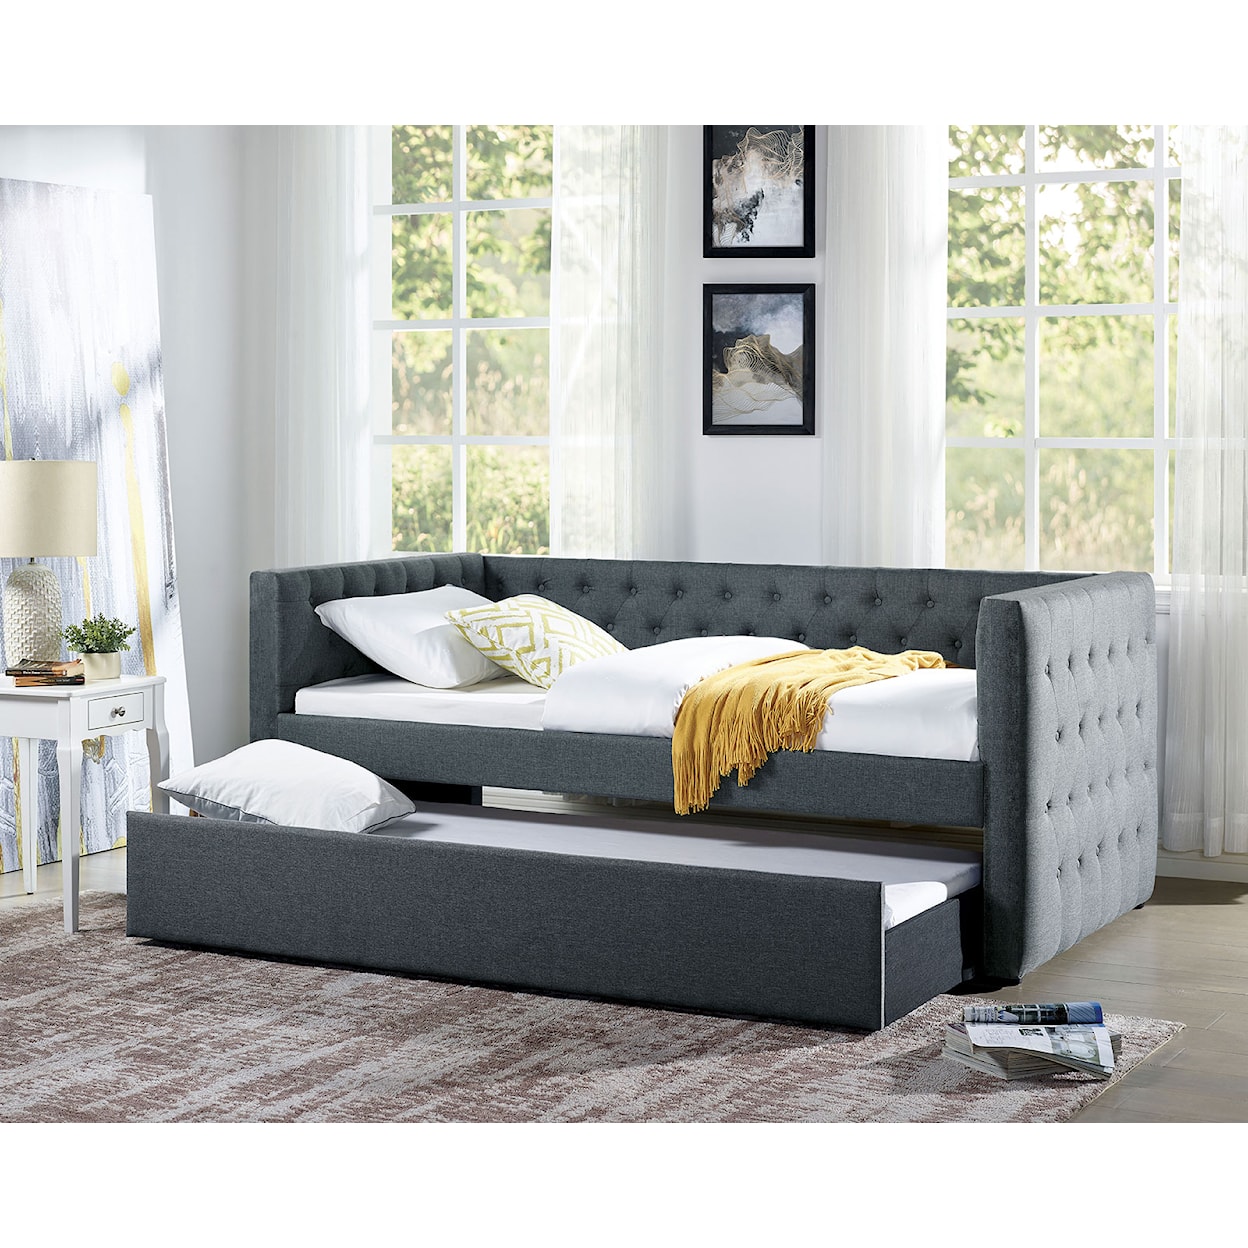 Furniture of America Tricia Twin Daybed with Trundle